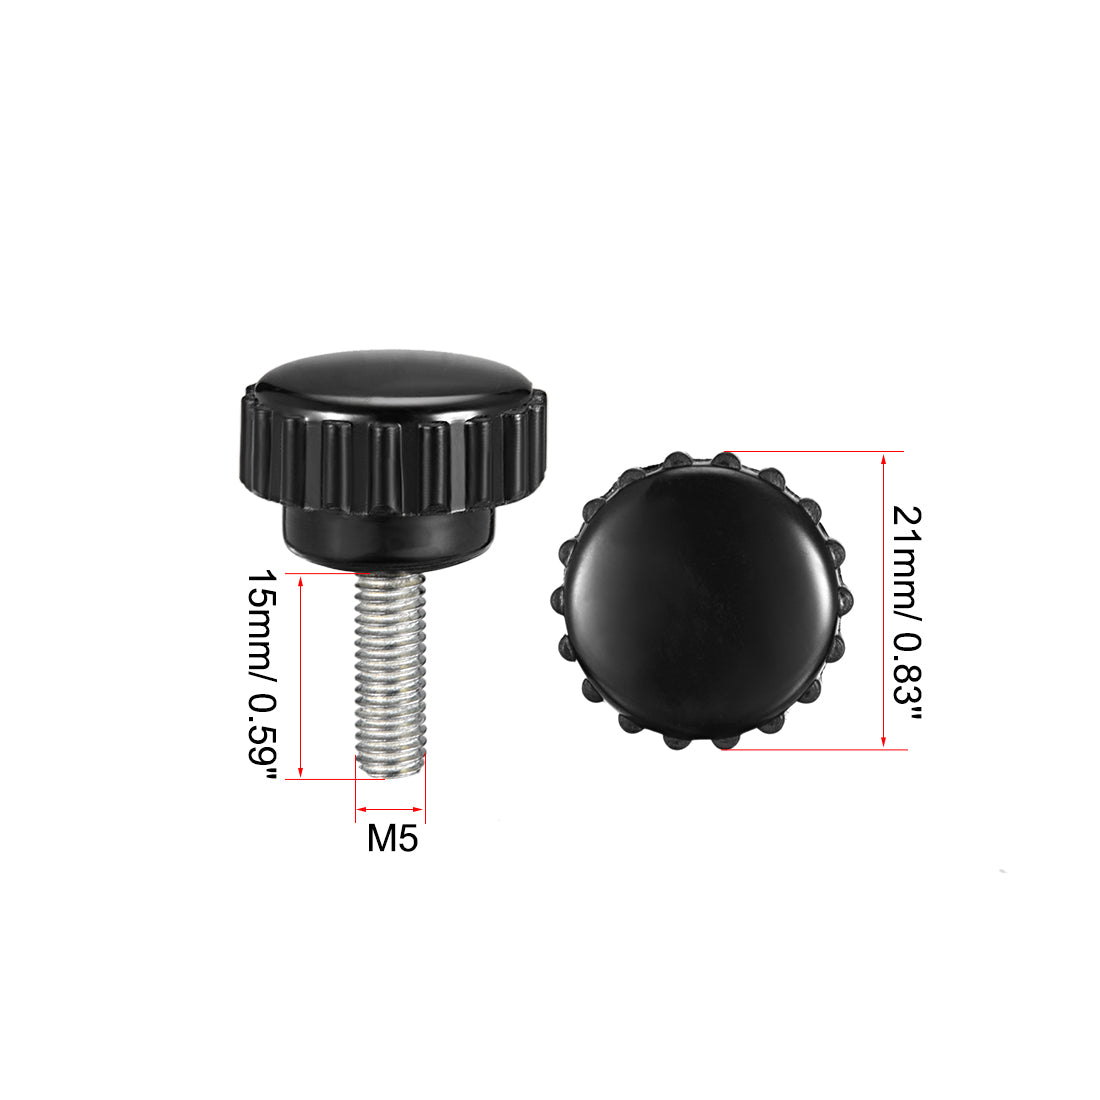 Uxcell Uxcell M5 x 10mm Male Thread Knurled Clamping Knobs Grip Thumb Screw on Type  4 Pcs